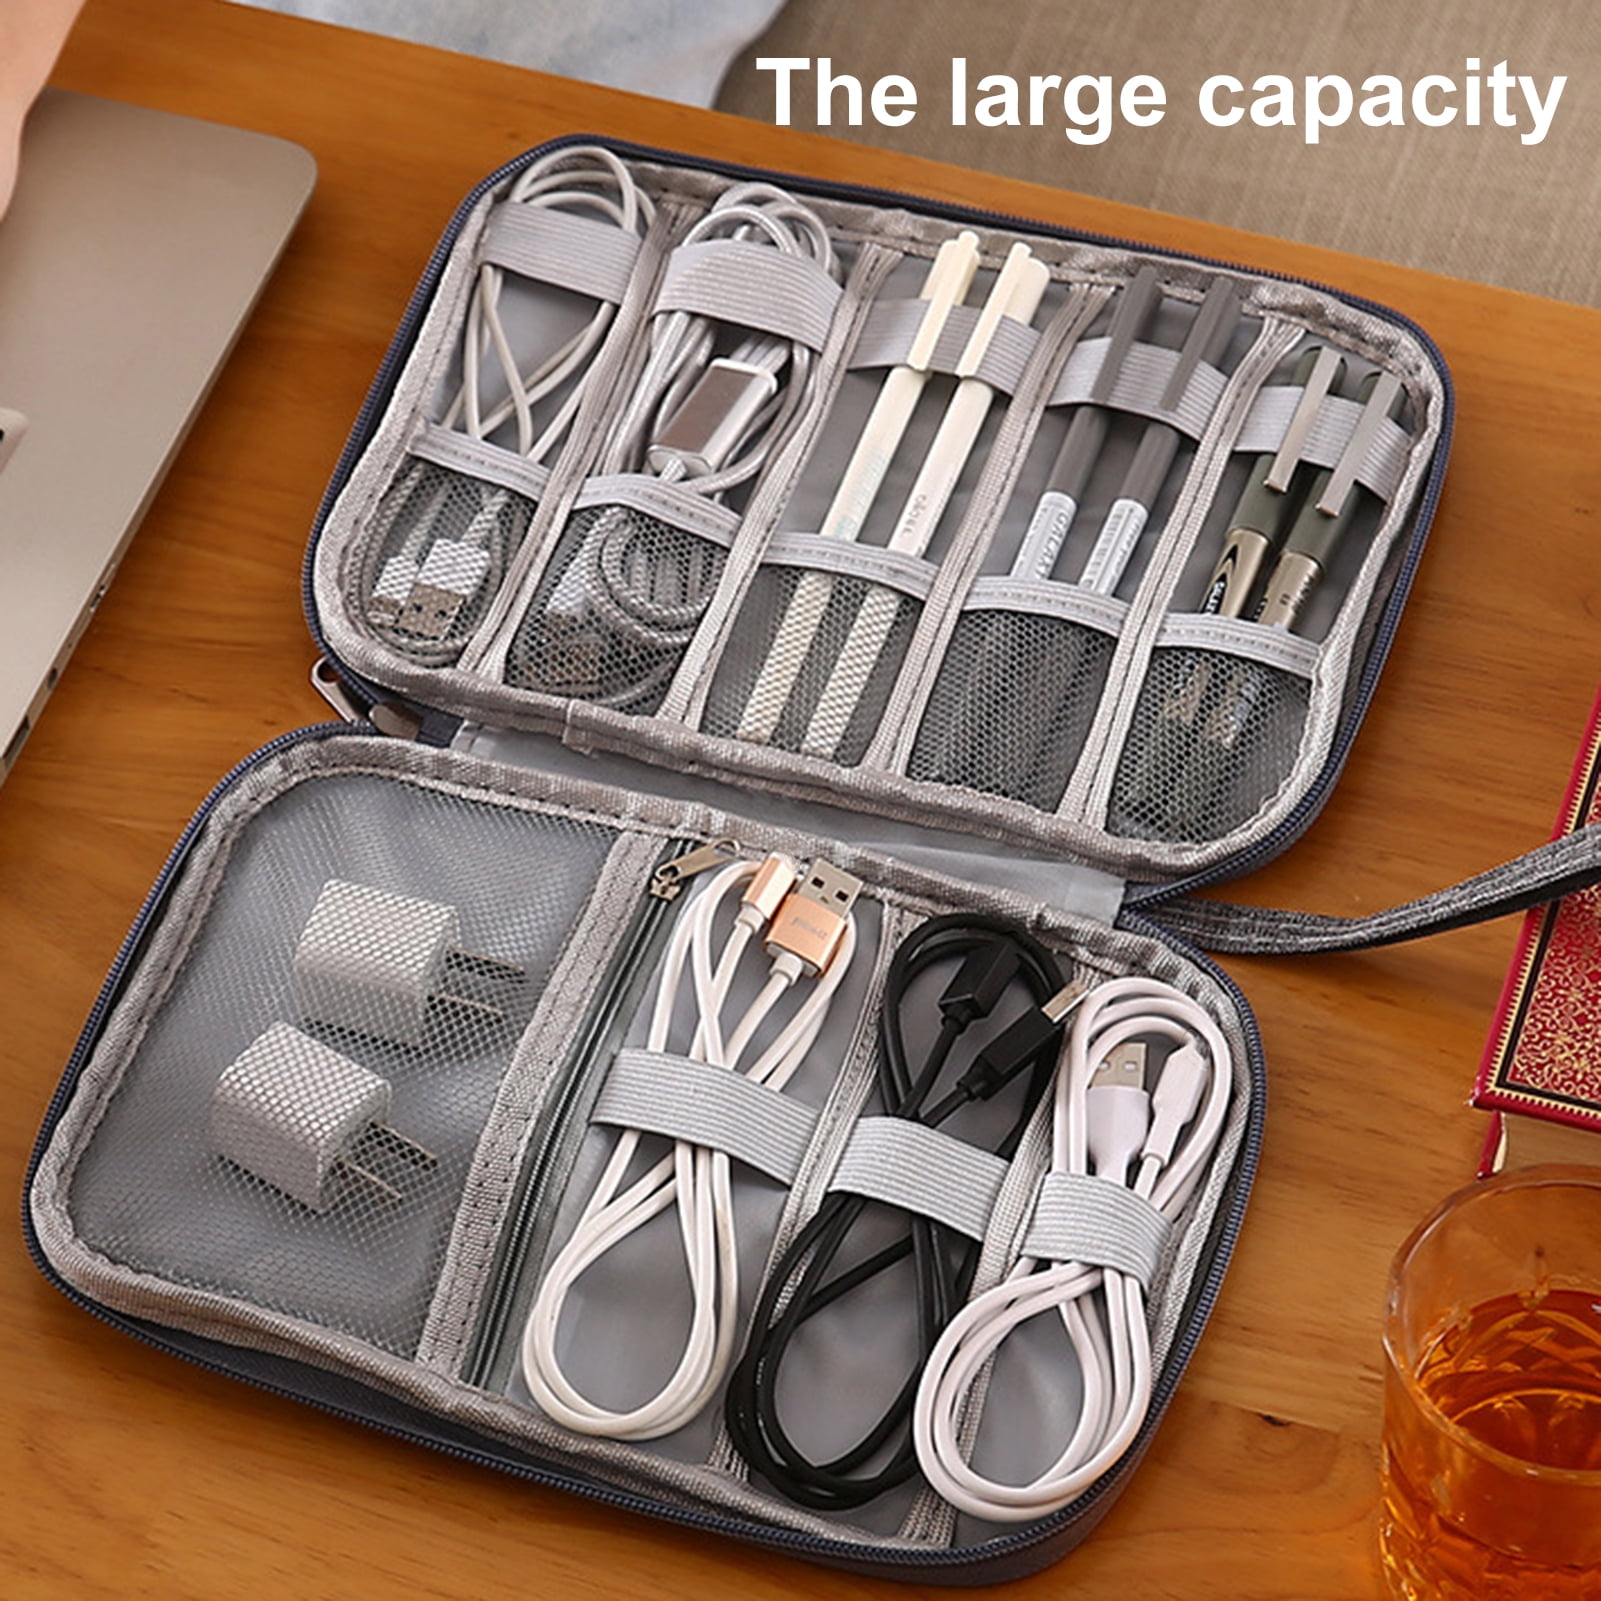 Waterproof Portable Electronic Organizer Bag Travel Accessories Universal  Cord Storage Case for Charging Cable, Cell Phone, Power Bank, Kid's Pens